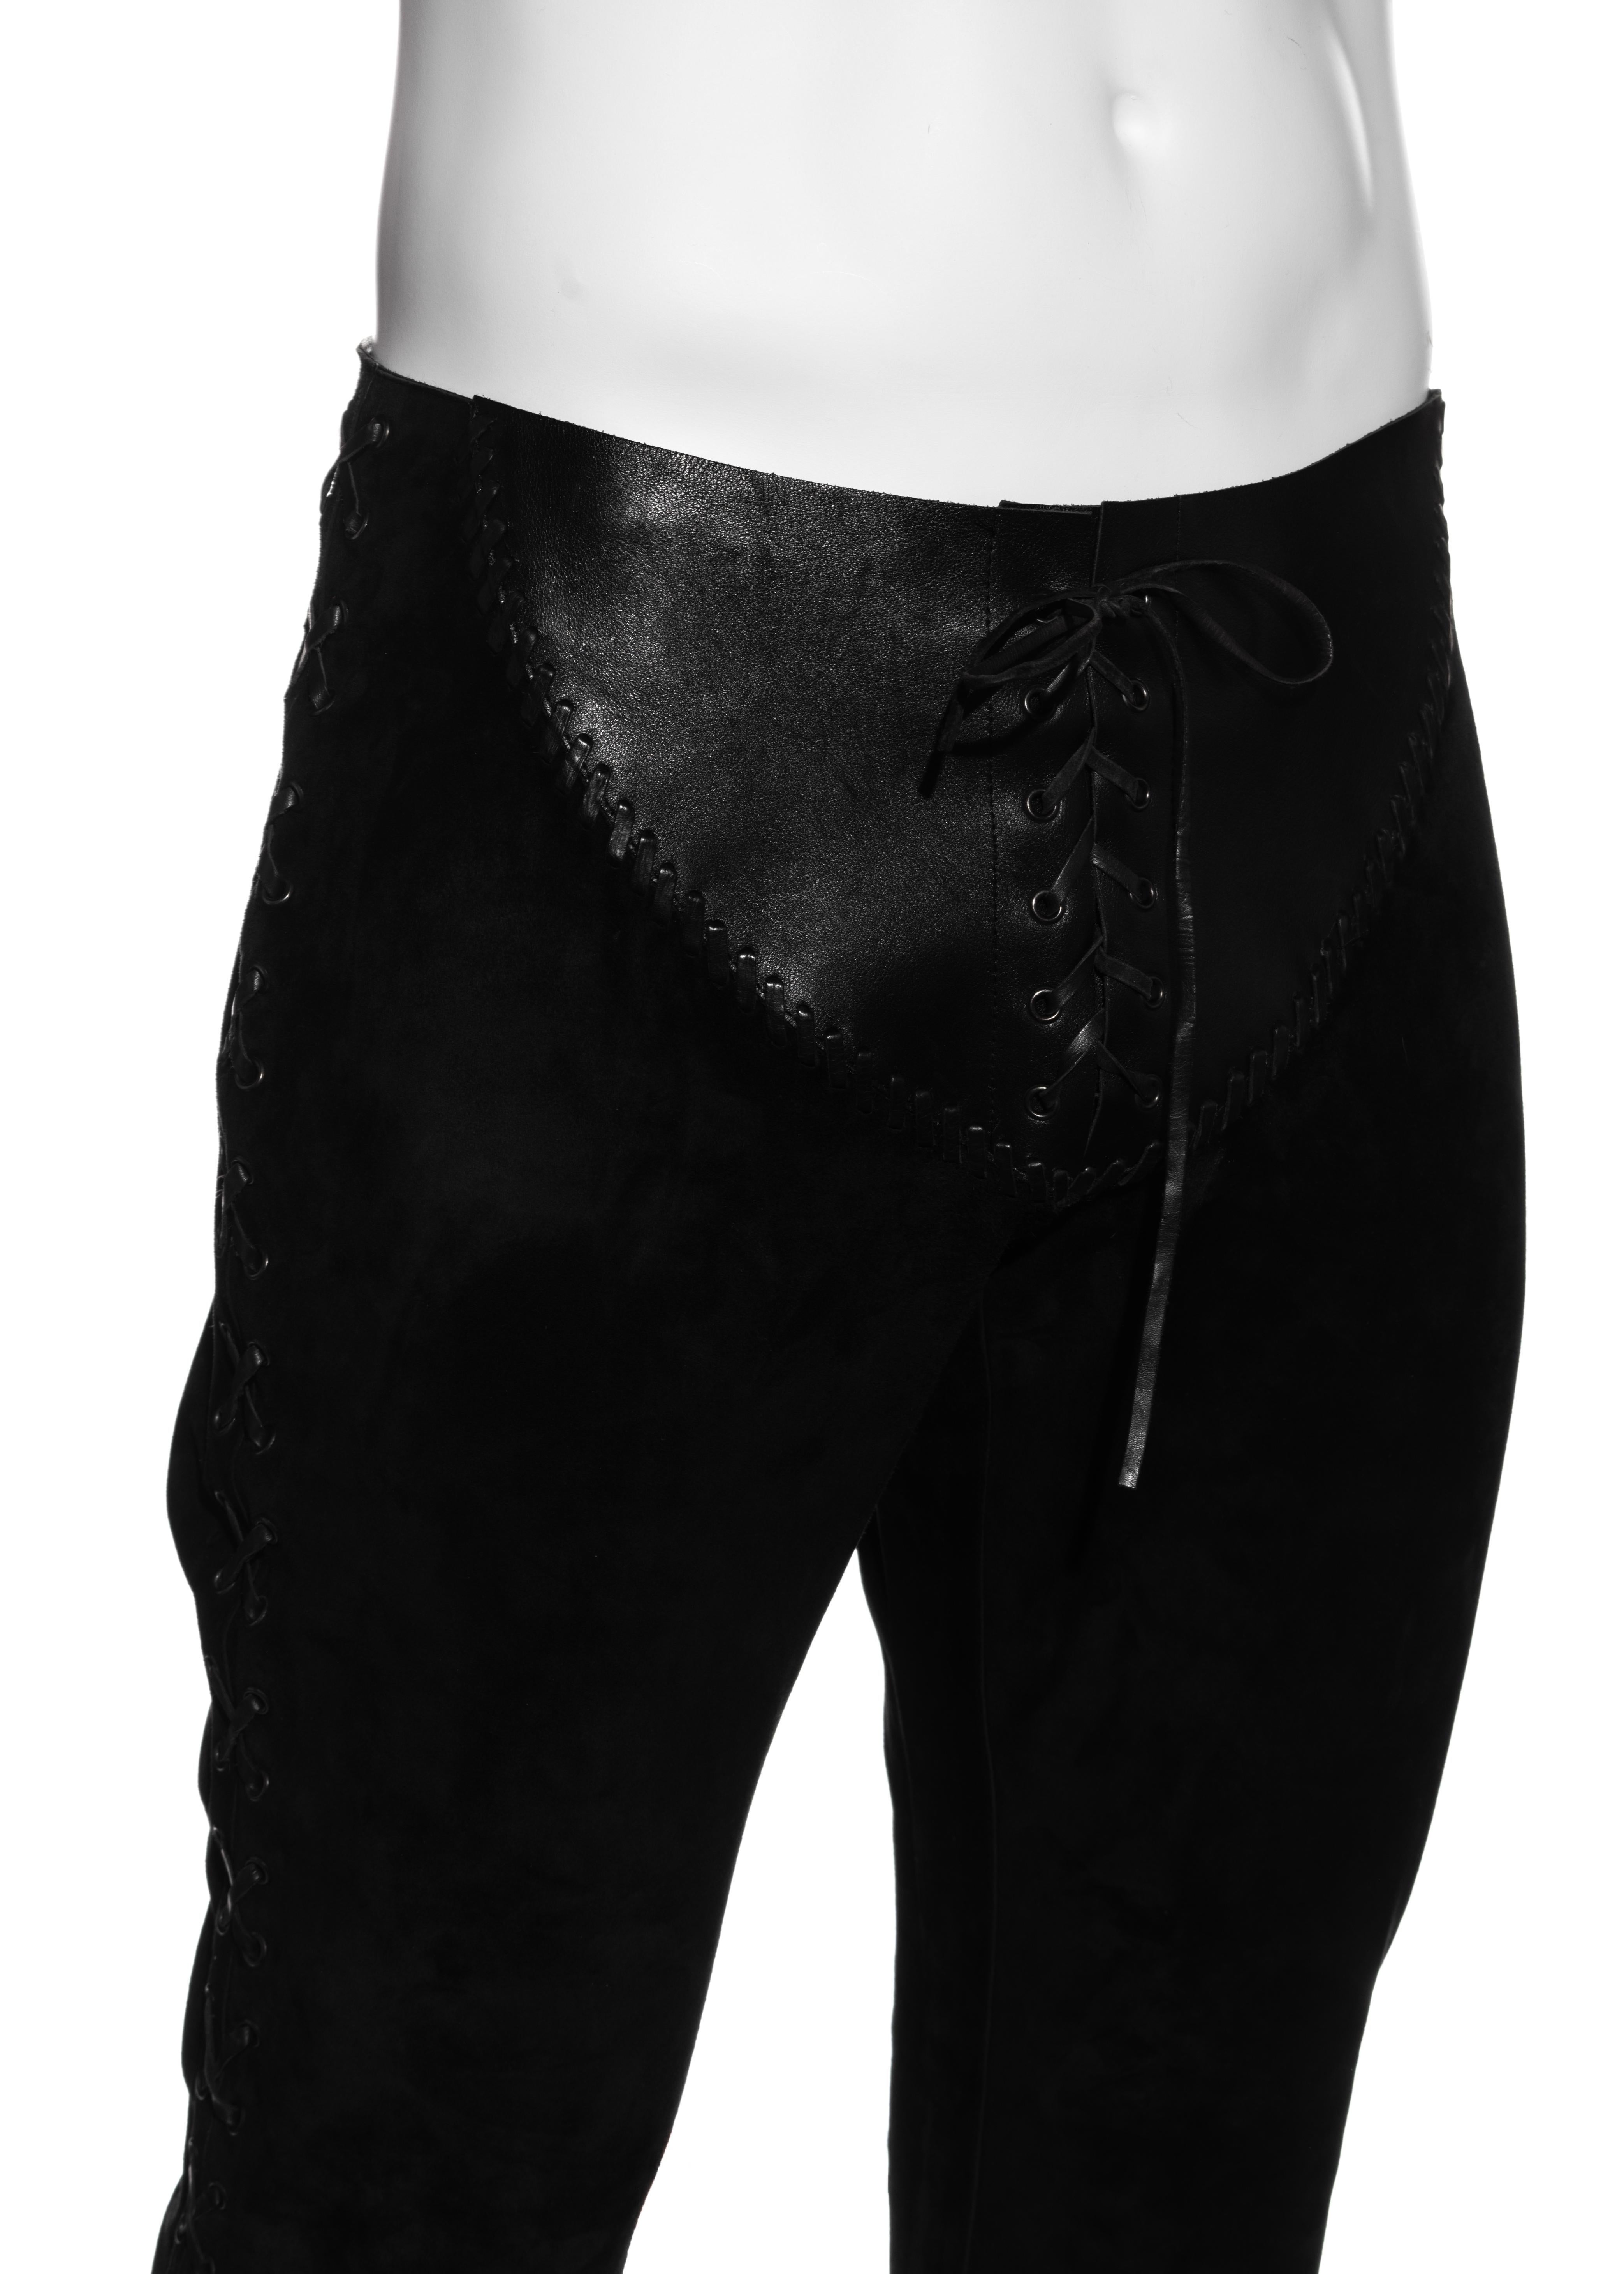 Black Gucci by Tom Ford men's leather and suede lace up flared pants, ss 2004